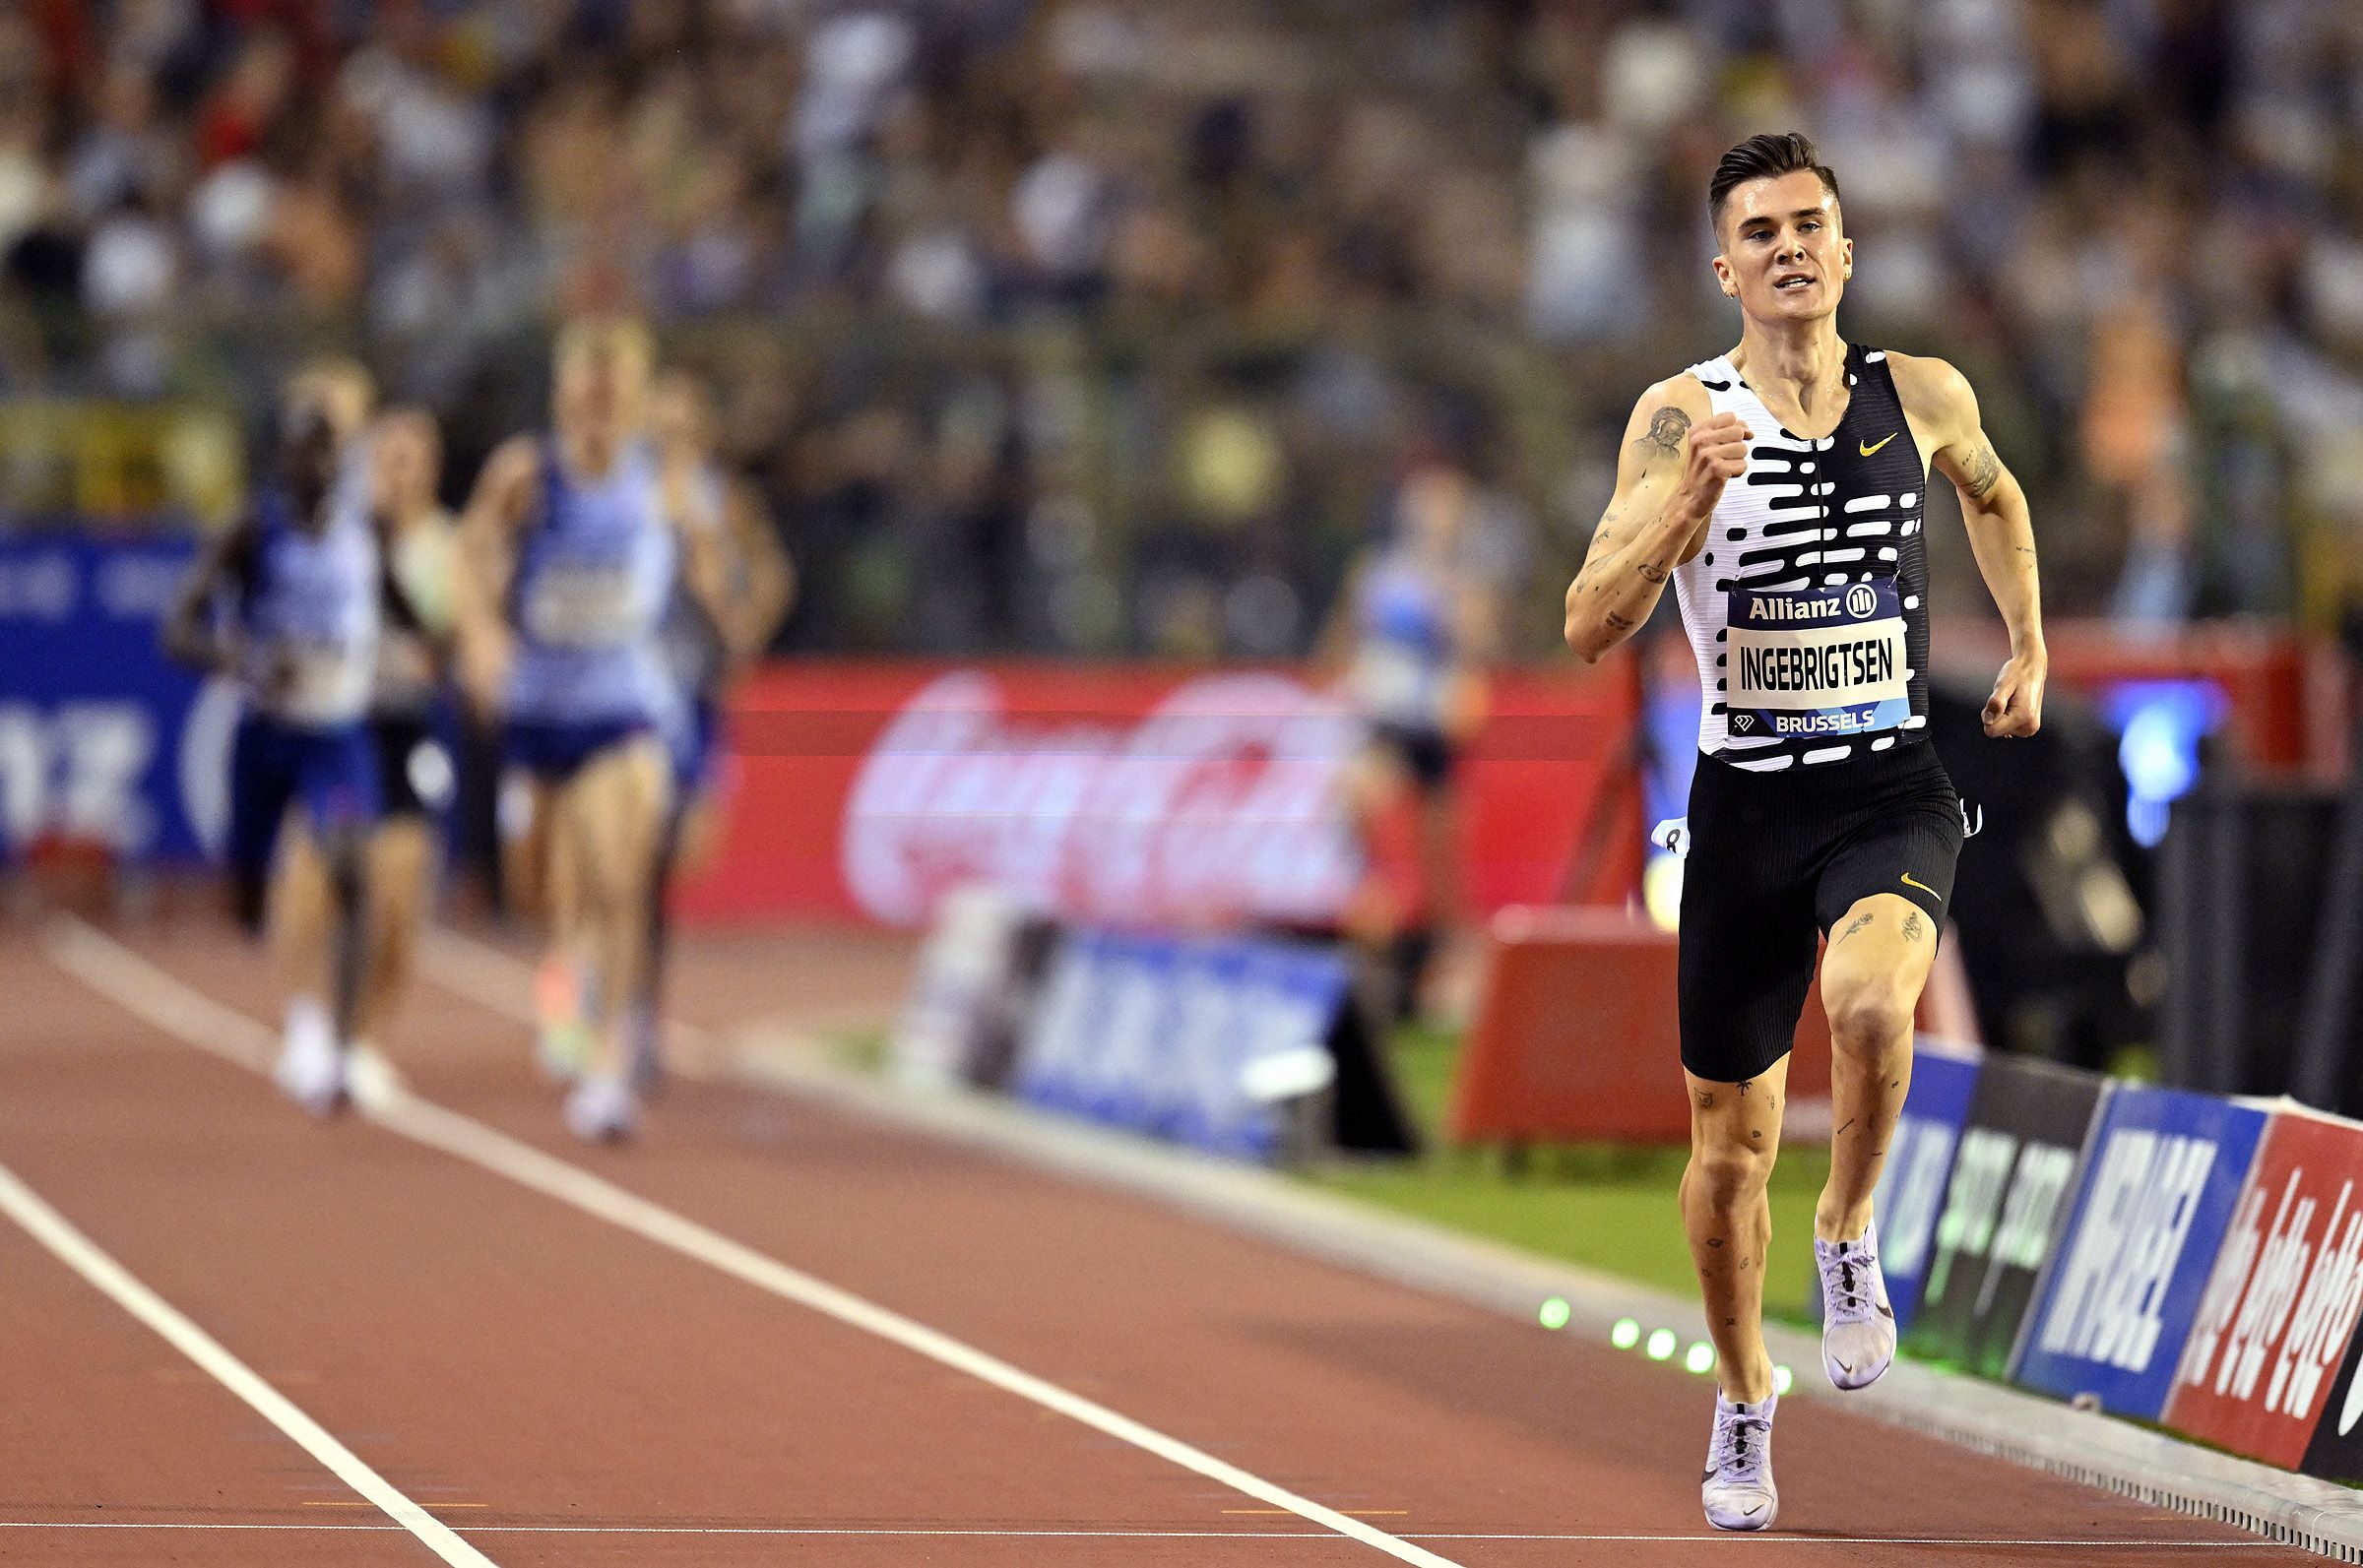 Jakob Ingebrigtsen on his way to the 2000m world record in Brussels